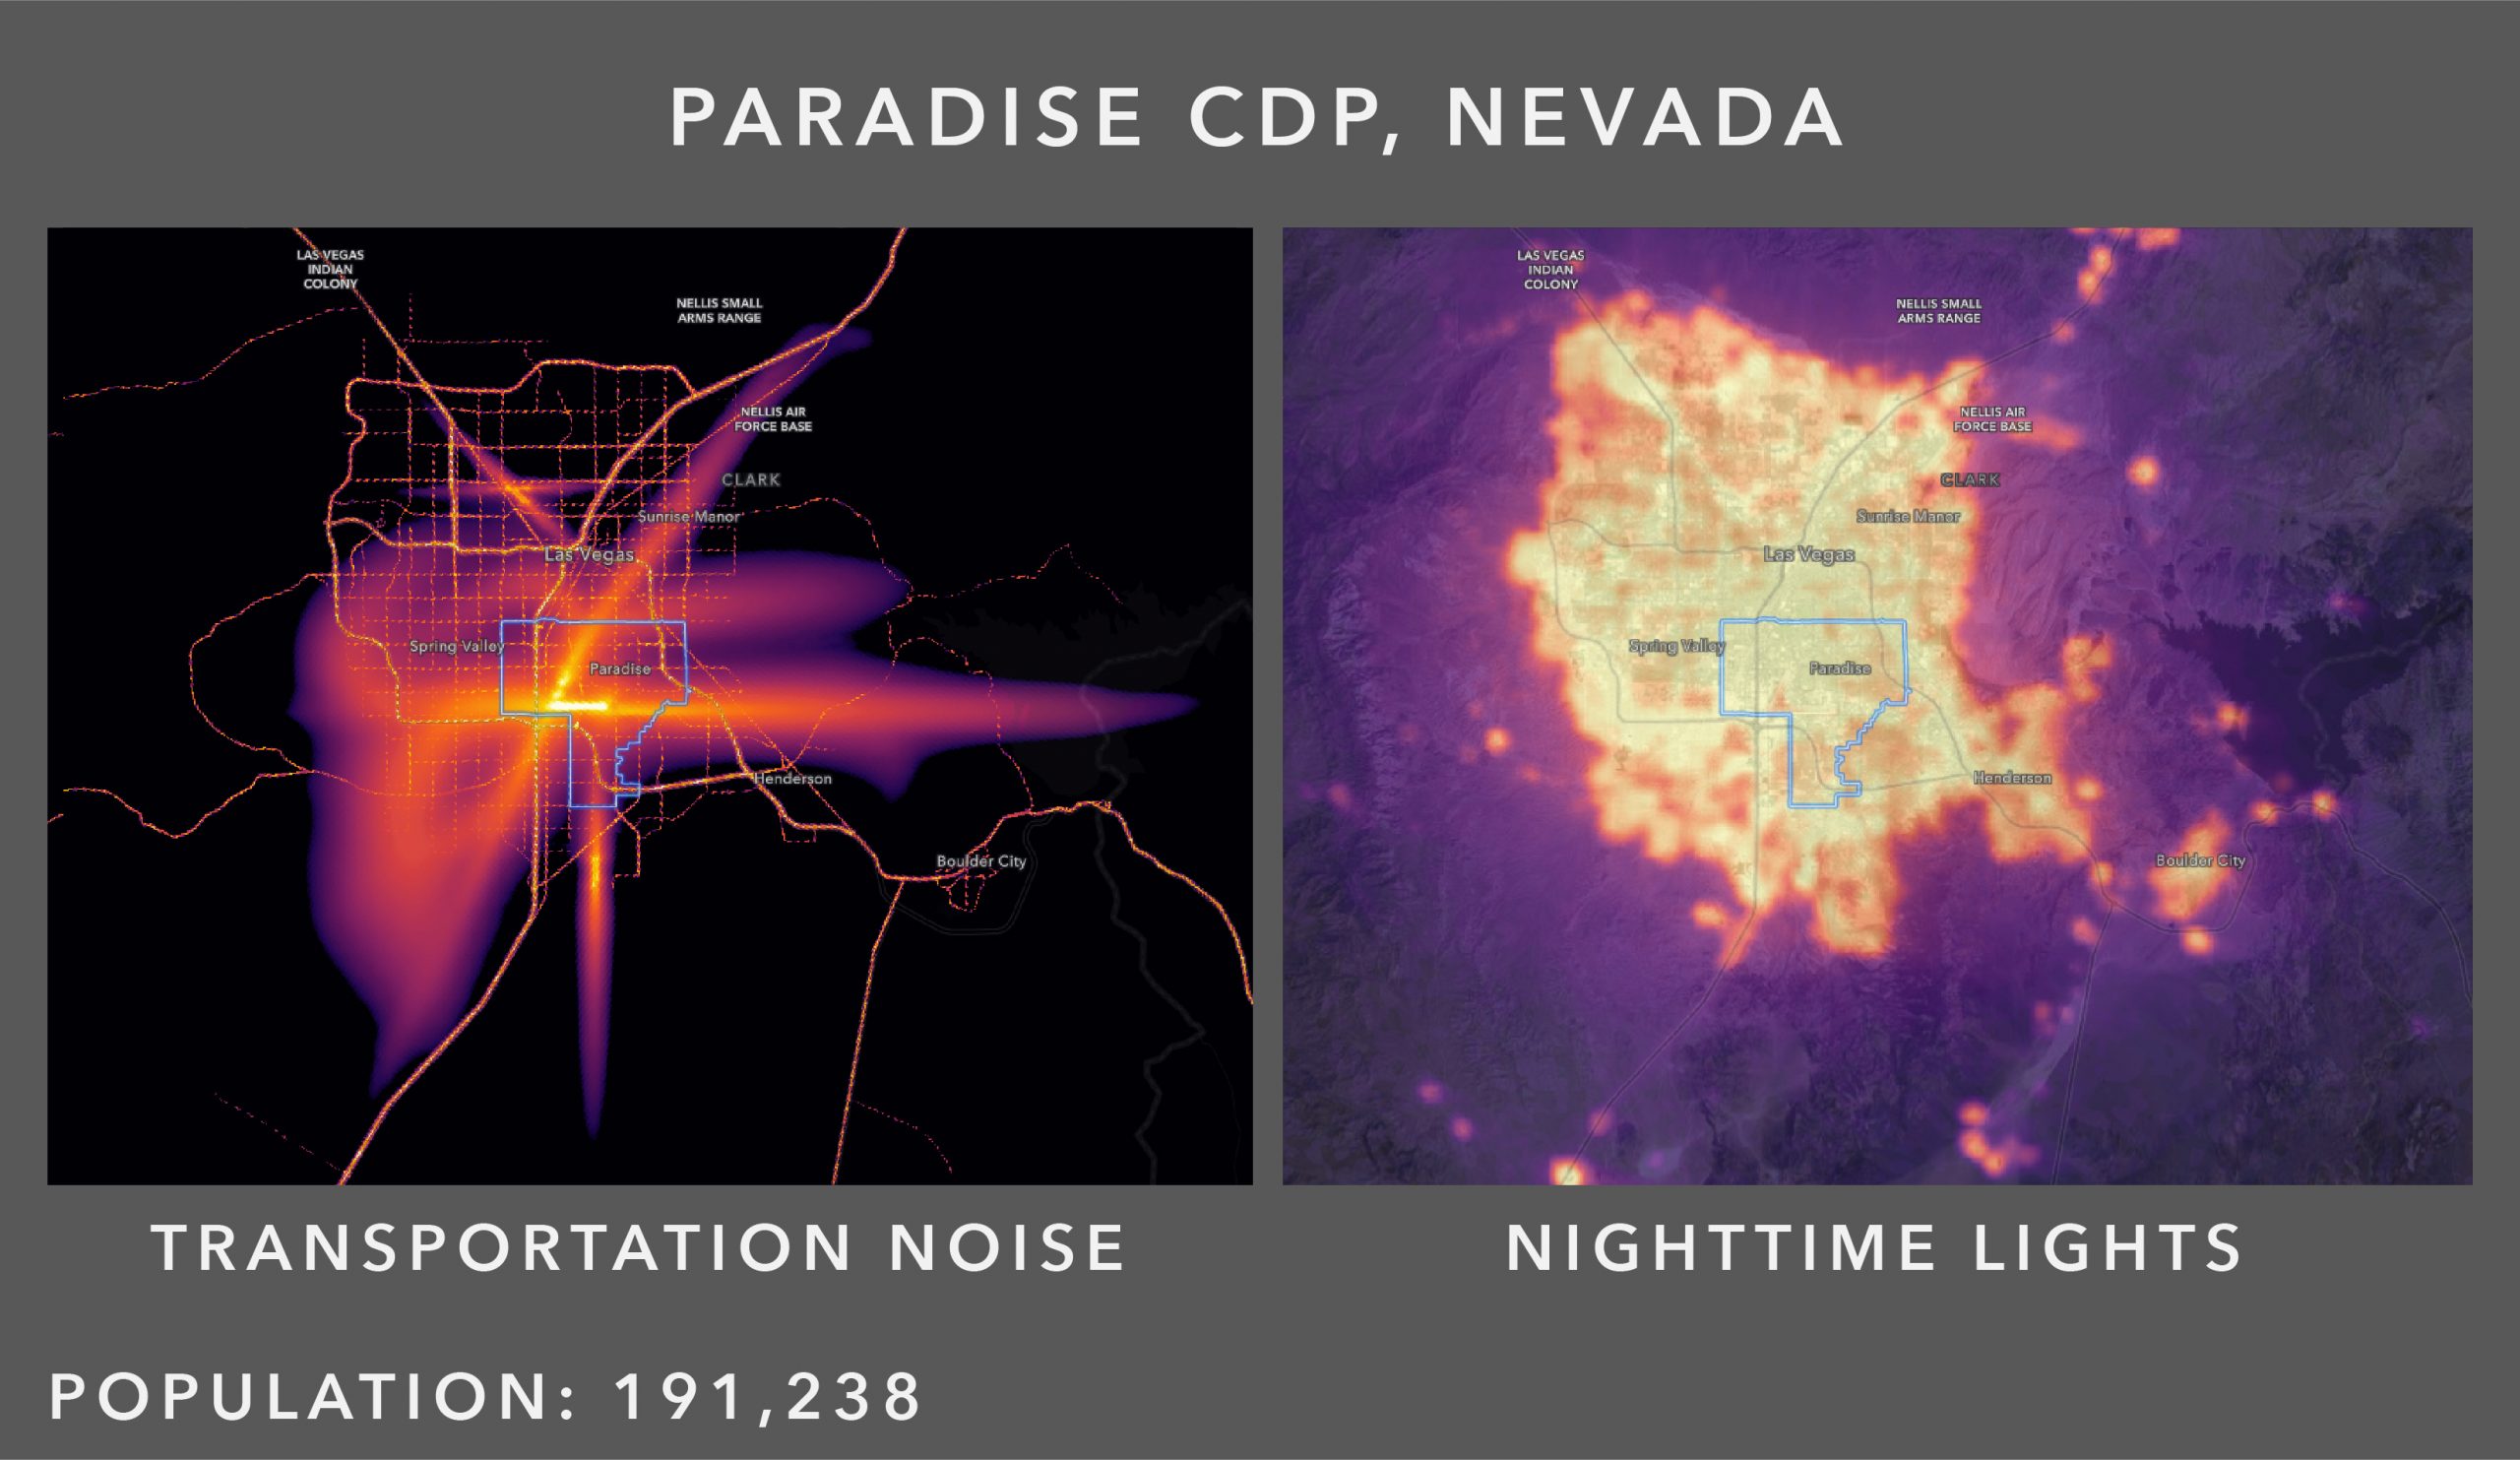 Comparing the nighttime lights and noise patterns of Paradise CDP, Nevada.